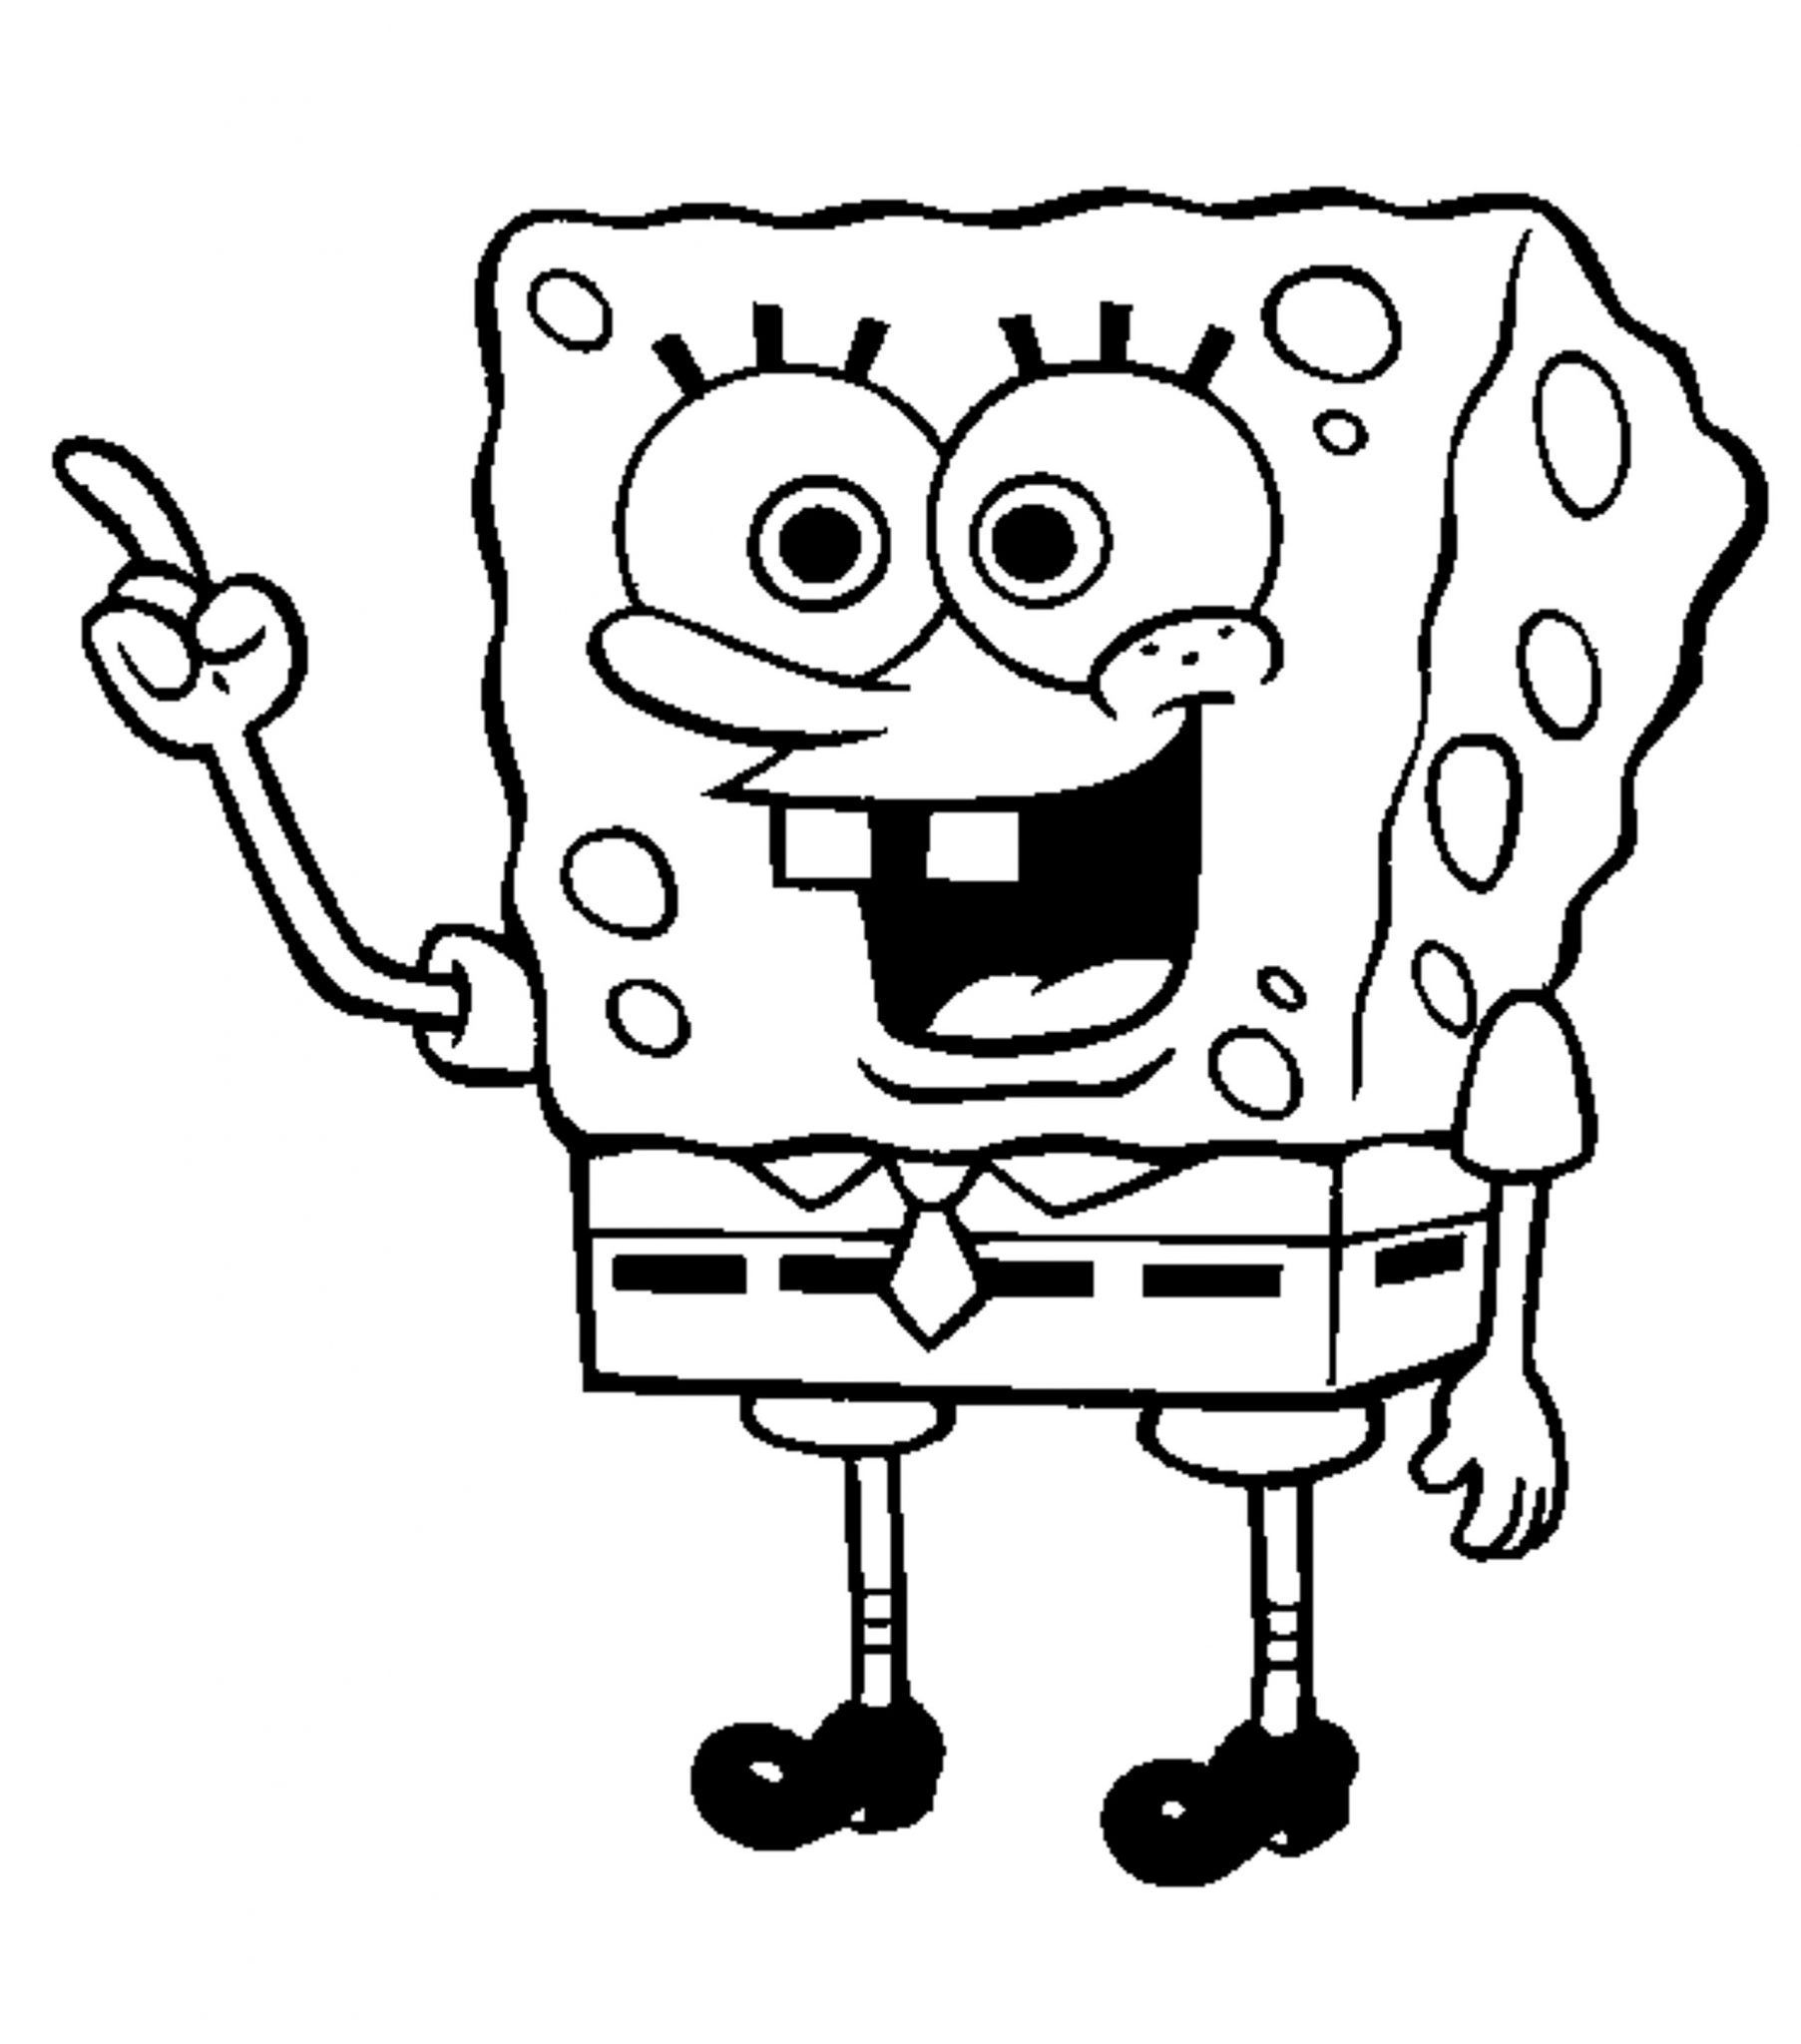 Print & Download   Choosing SpongeBob Coloring Pages For Your ...